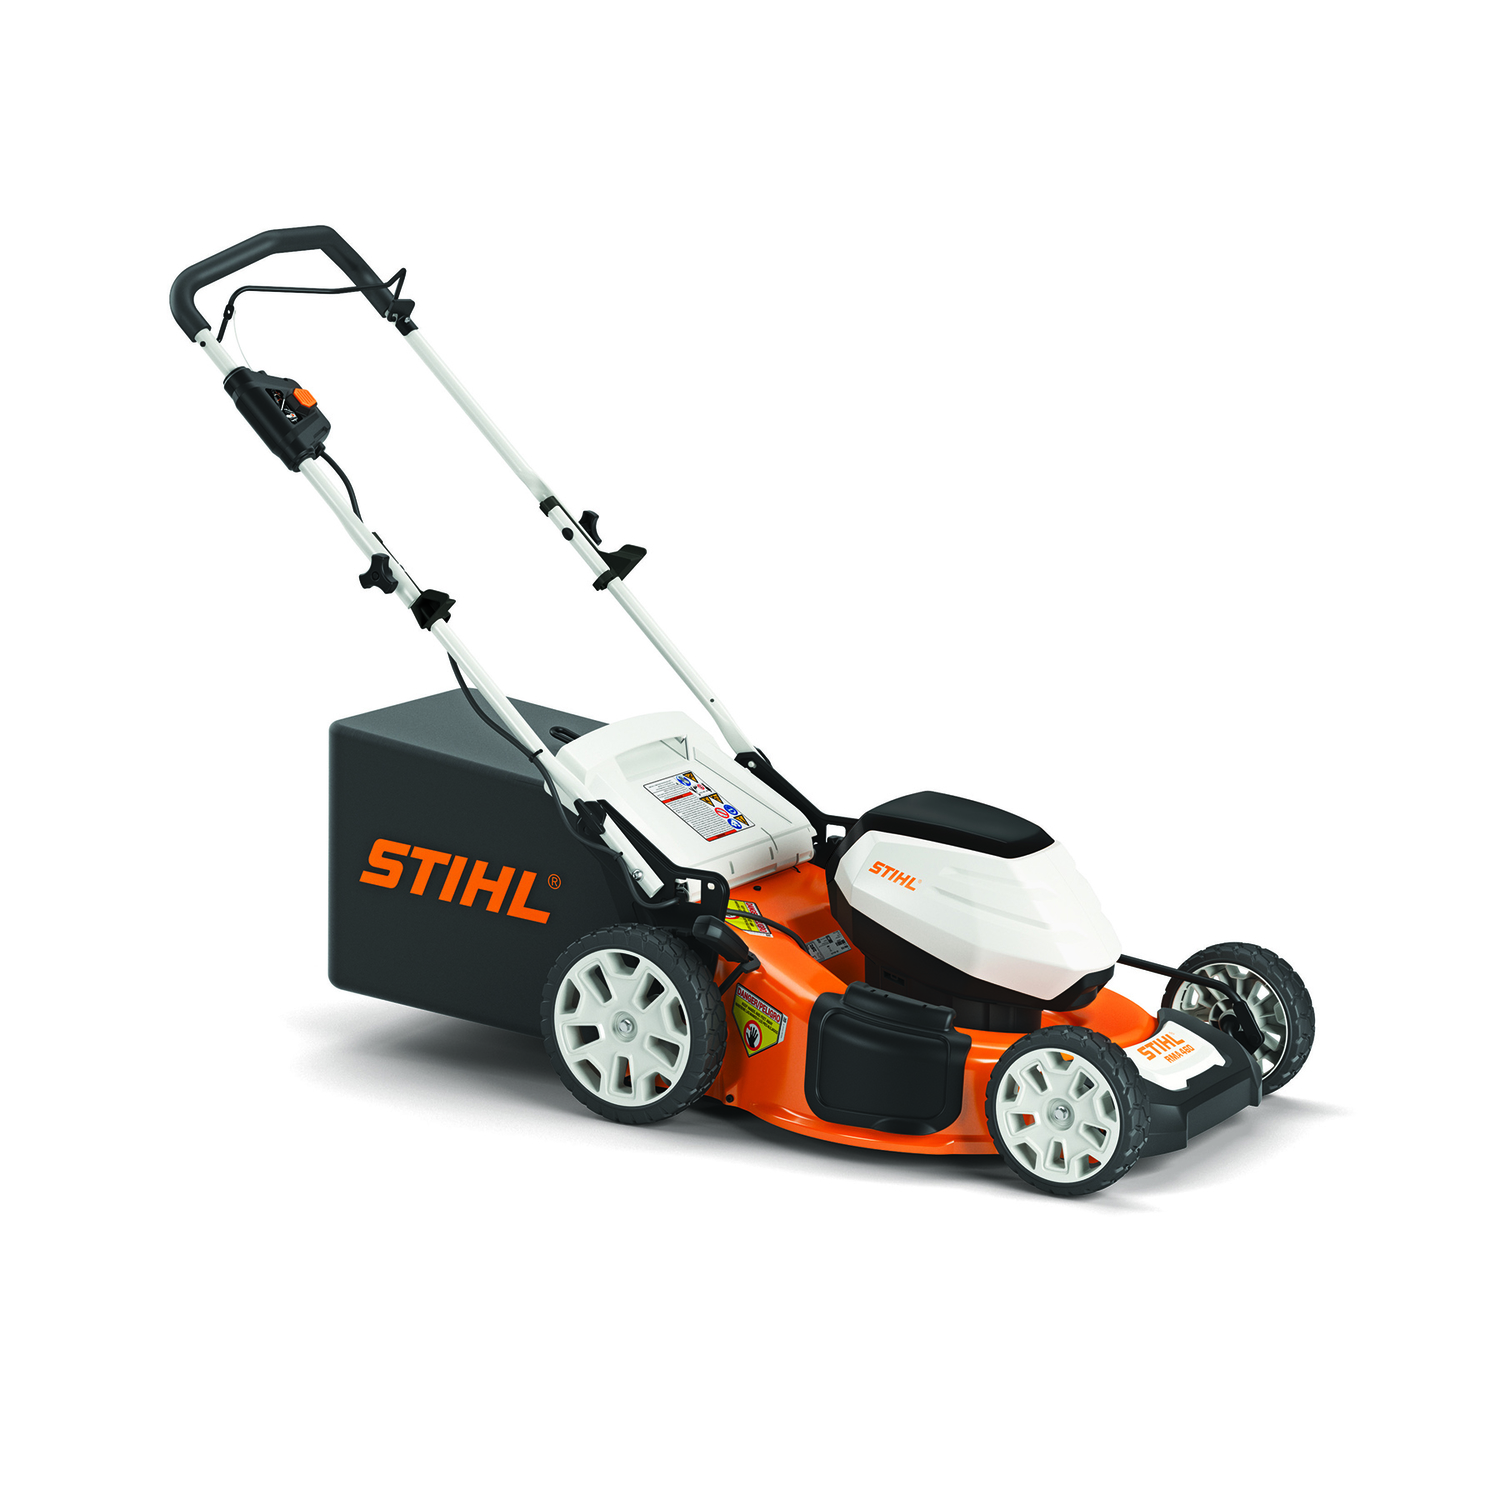 stihl battery weed eater price